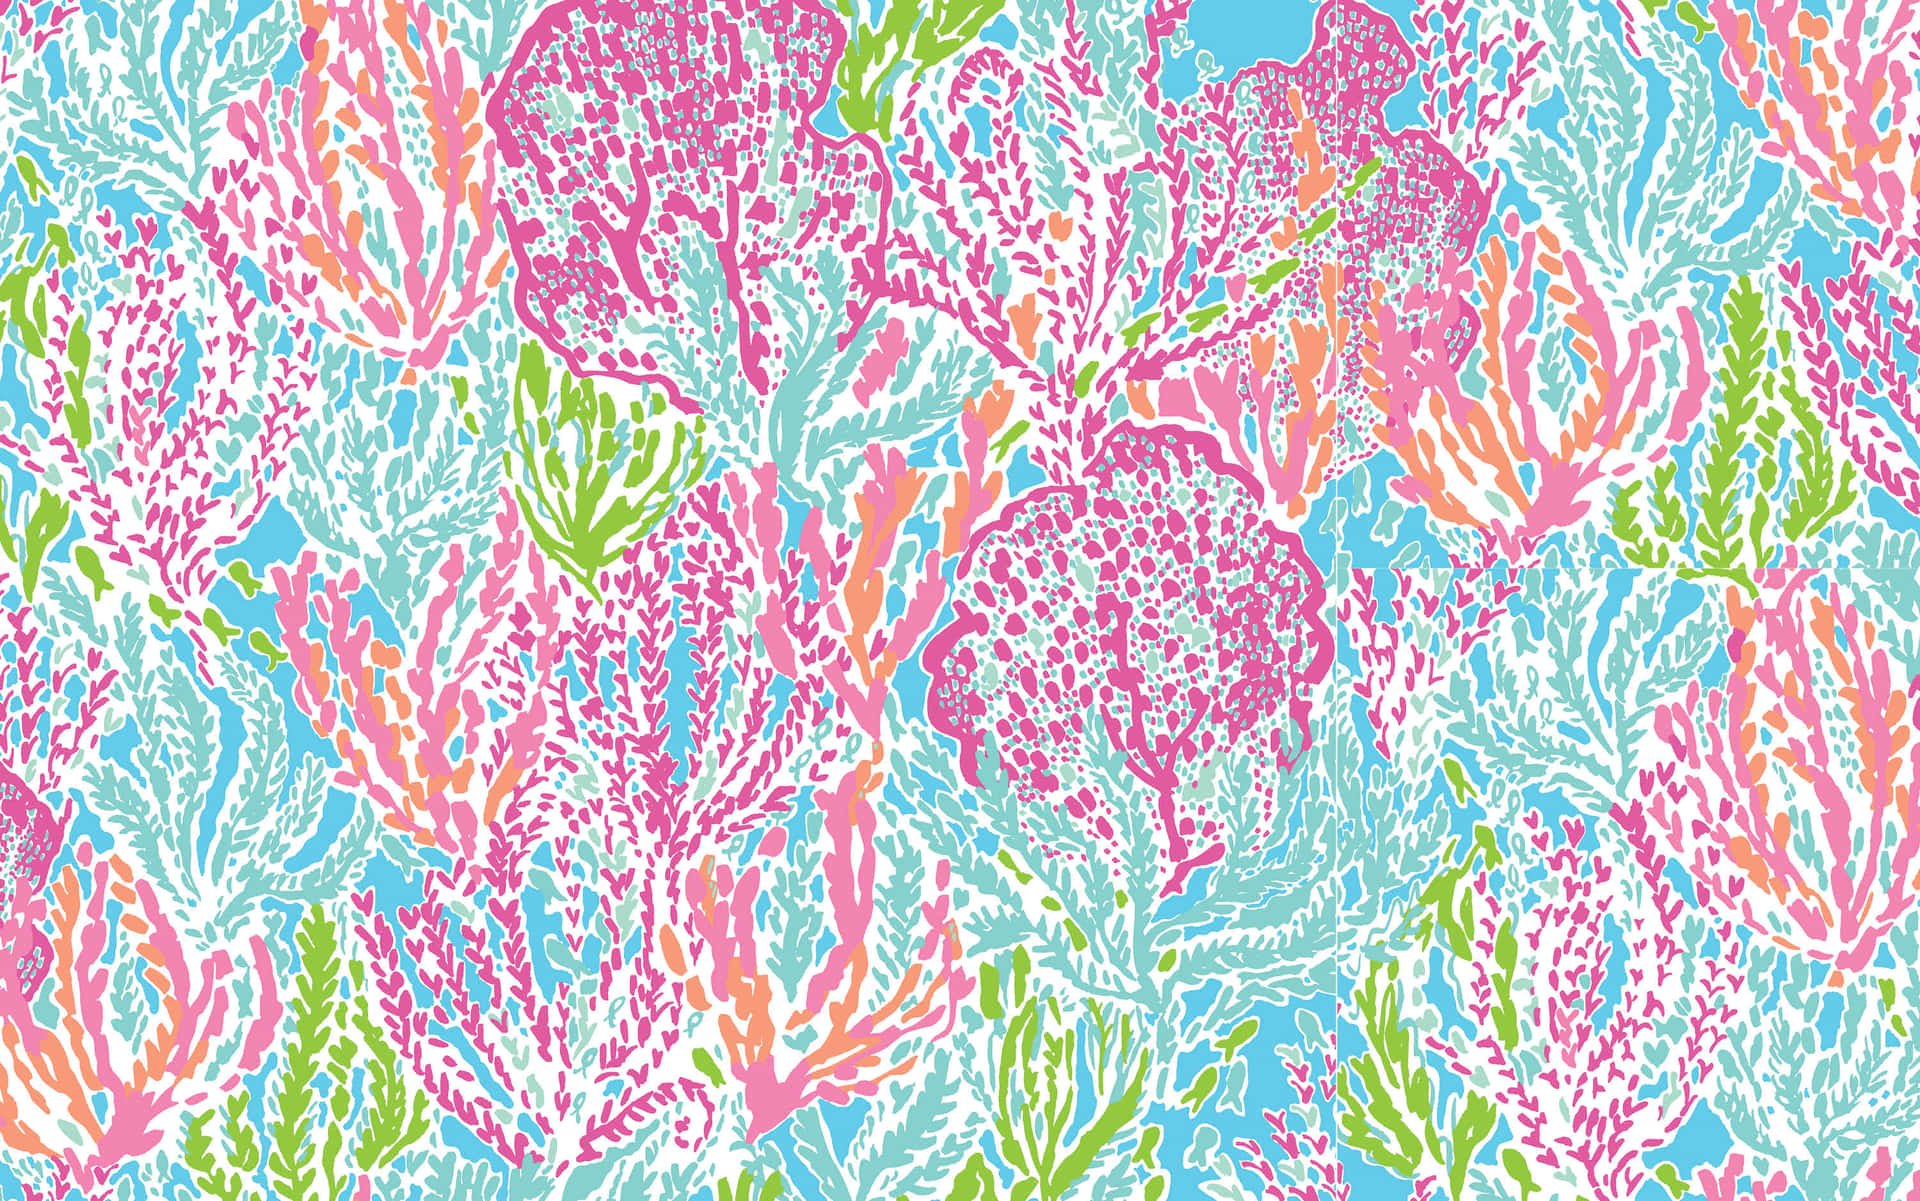 https://wallpapers.com/images/featured/lilly-pulitzer-background-wg0xpf6cdlqv6tv3.jpg